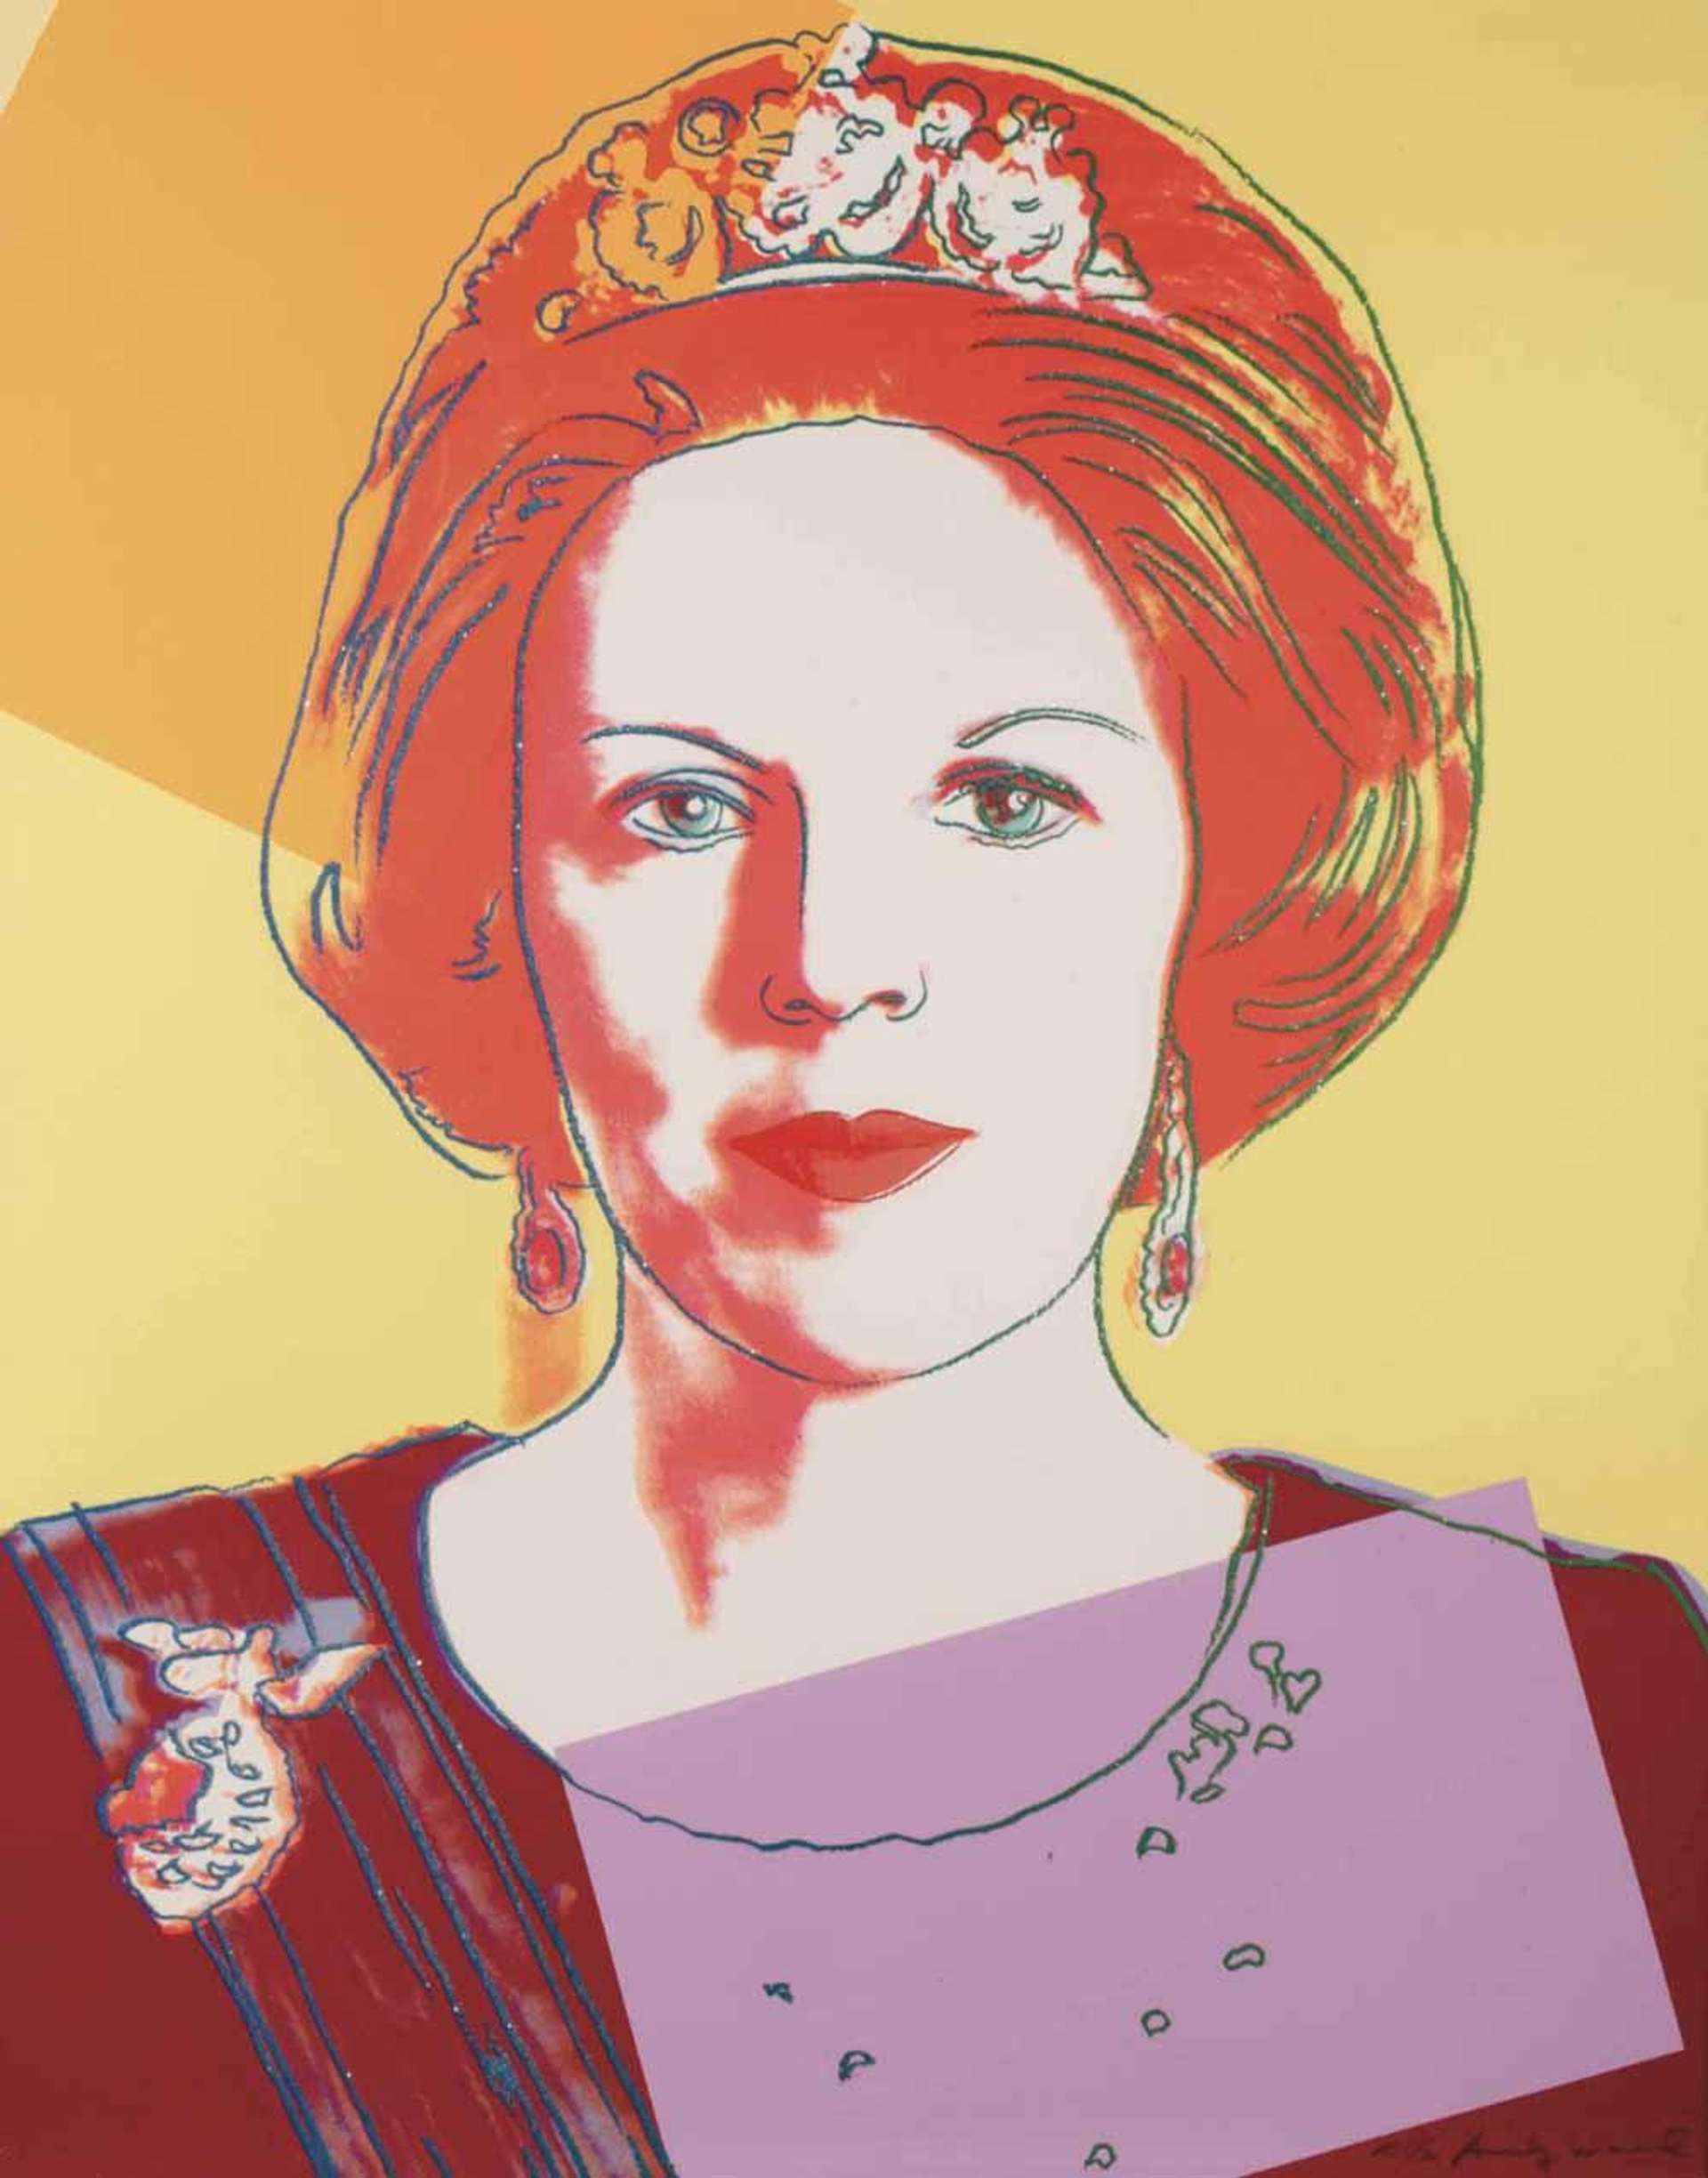 Queen Beatrix Of The Netherlands Royal Edition (F. &S. II.341A) - Signed Print by Andy Warhol 1985 - MyArtBroker